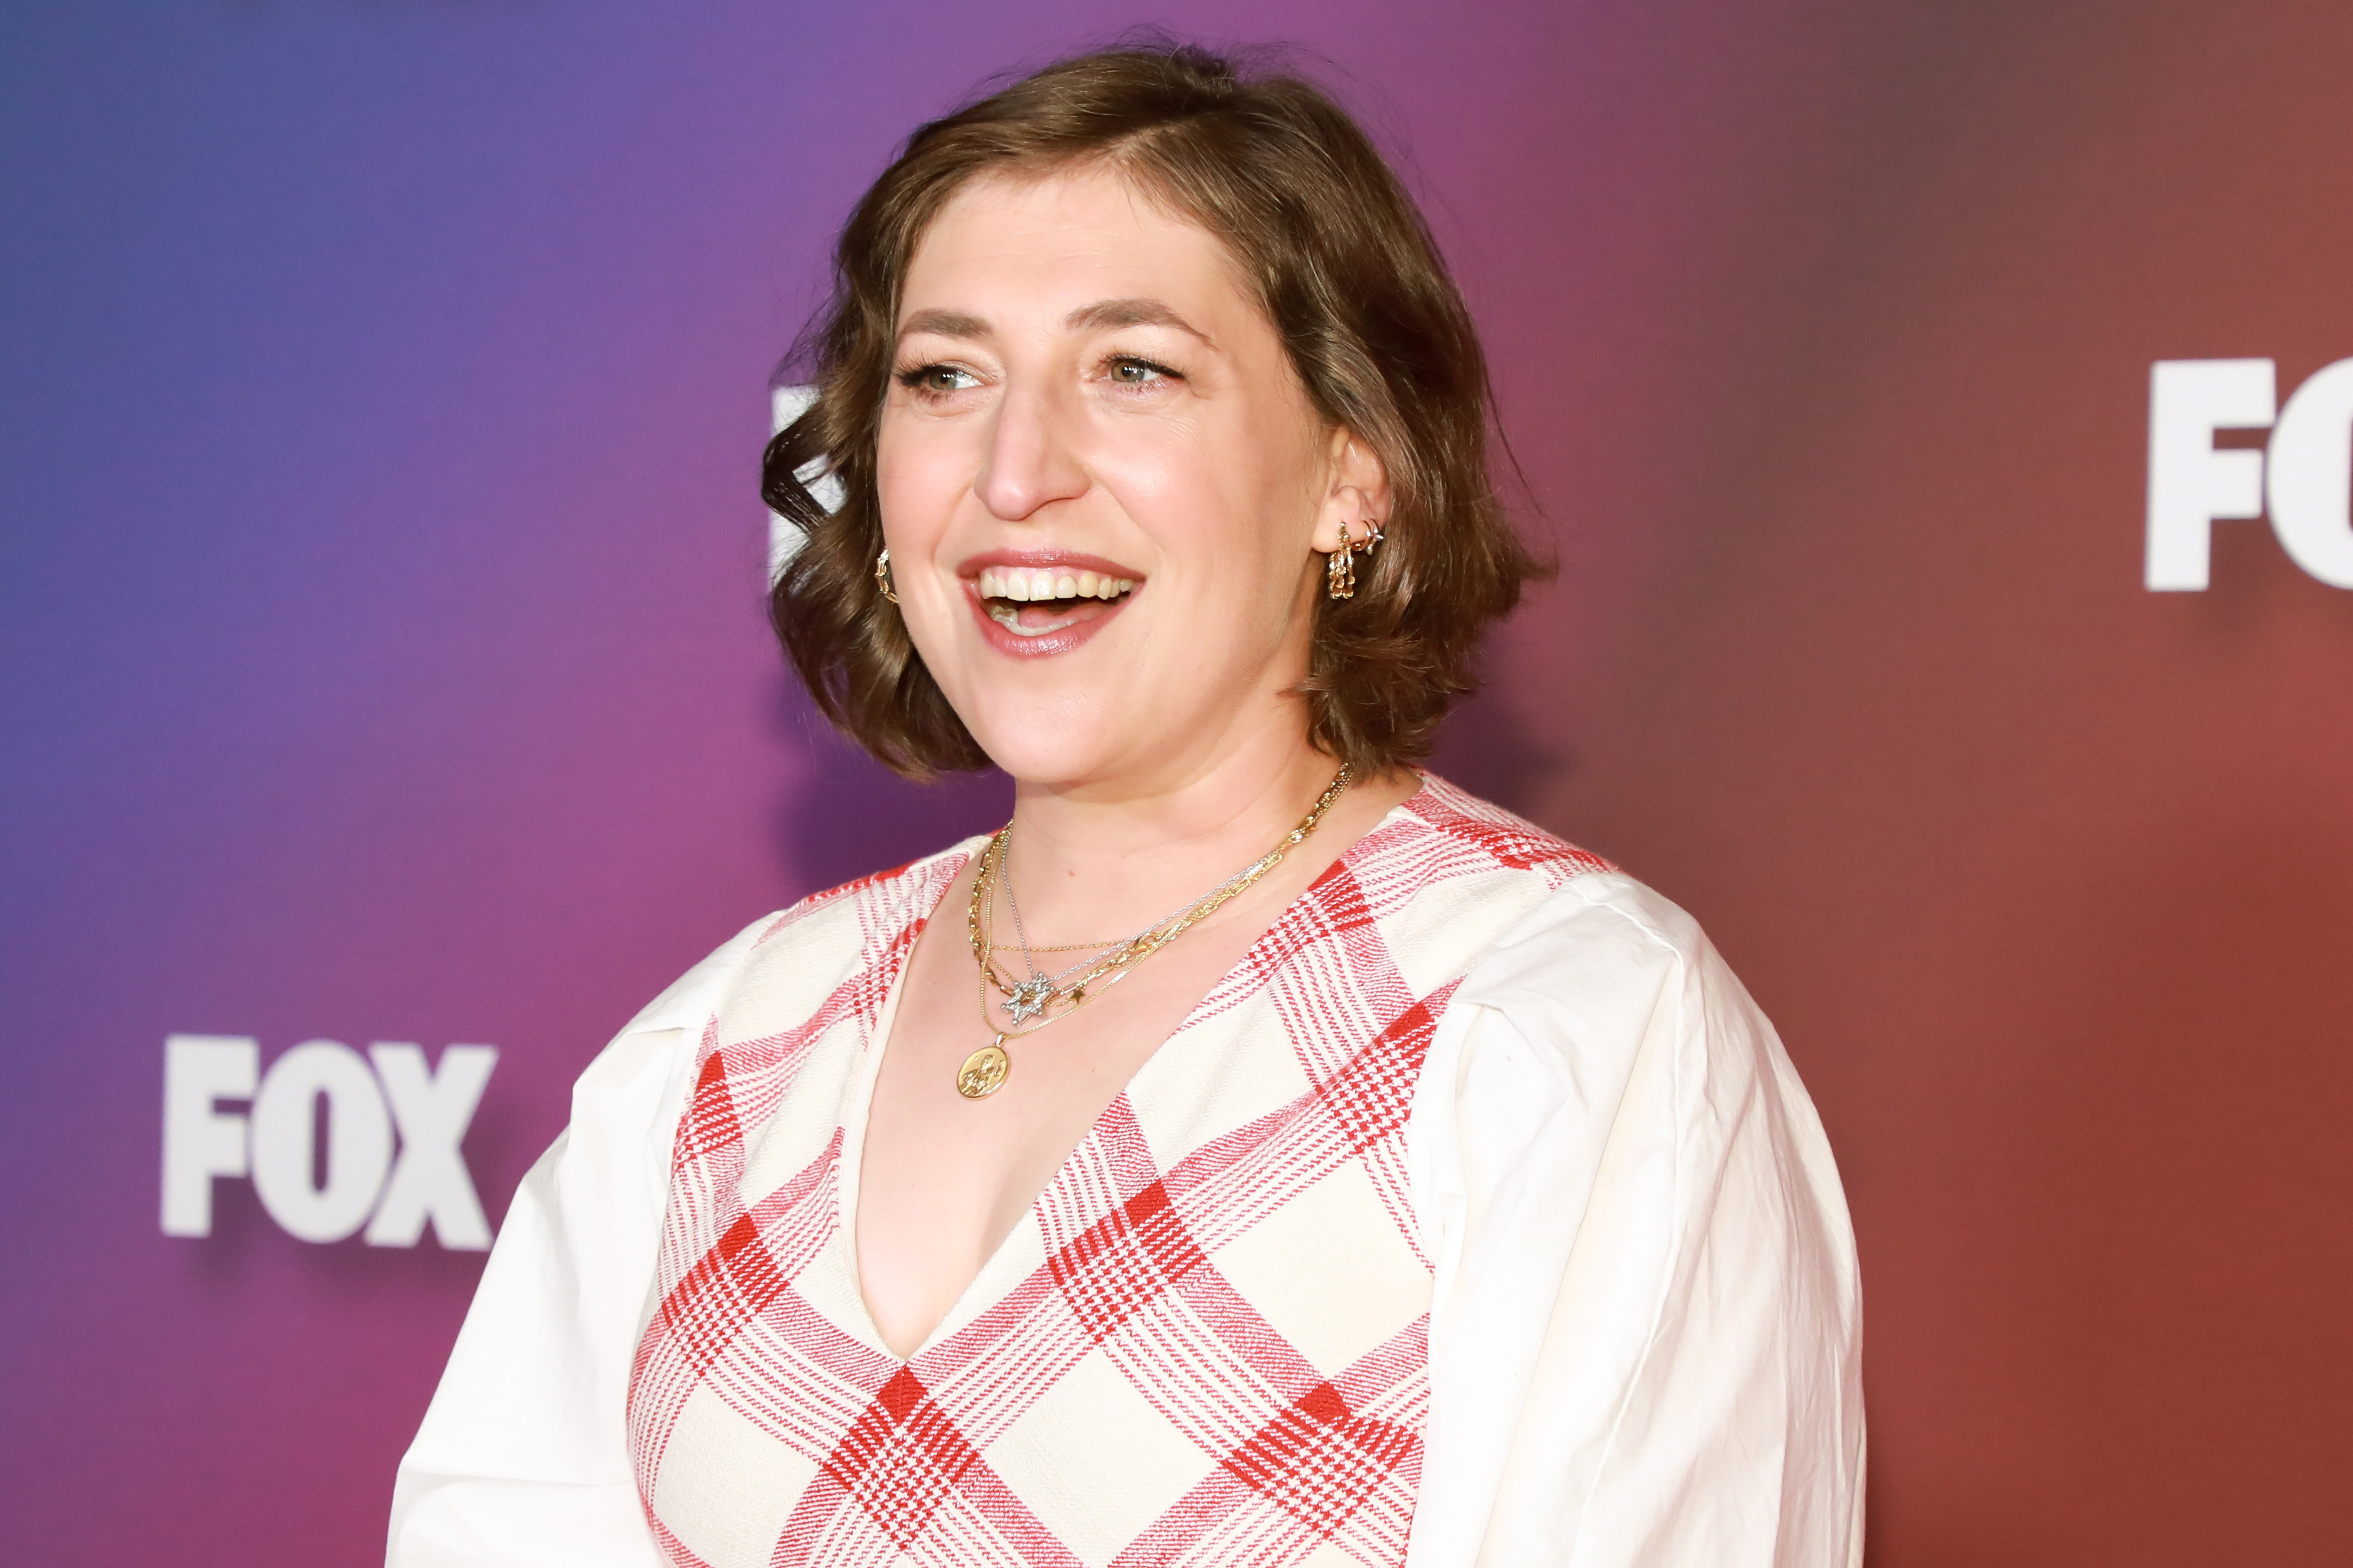 Mayim Bialik attends the 2022 Fox Upfront on May 16, 2022 in New York City | Source: Getty Images